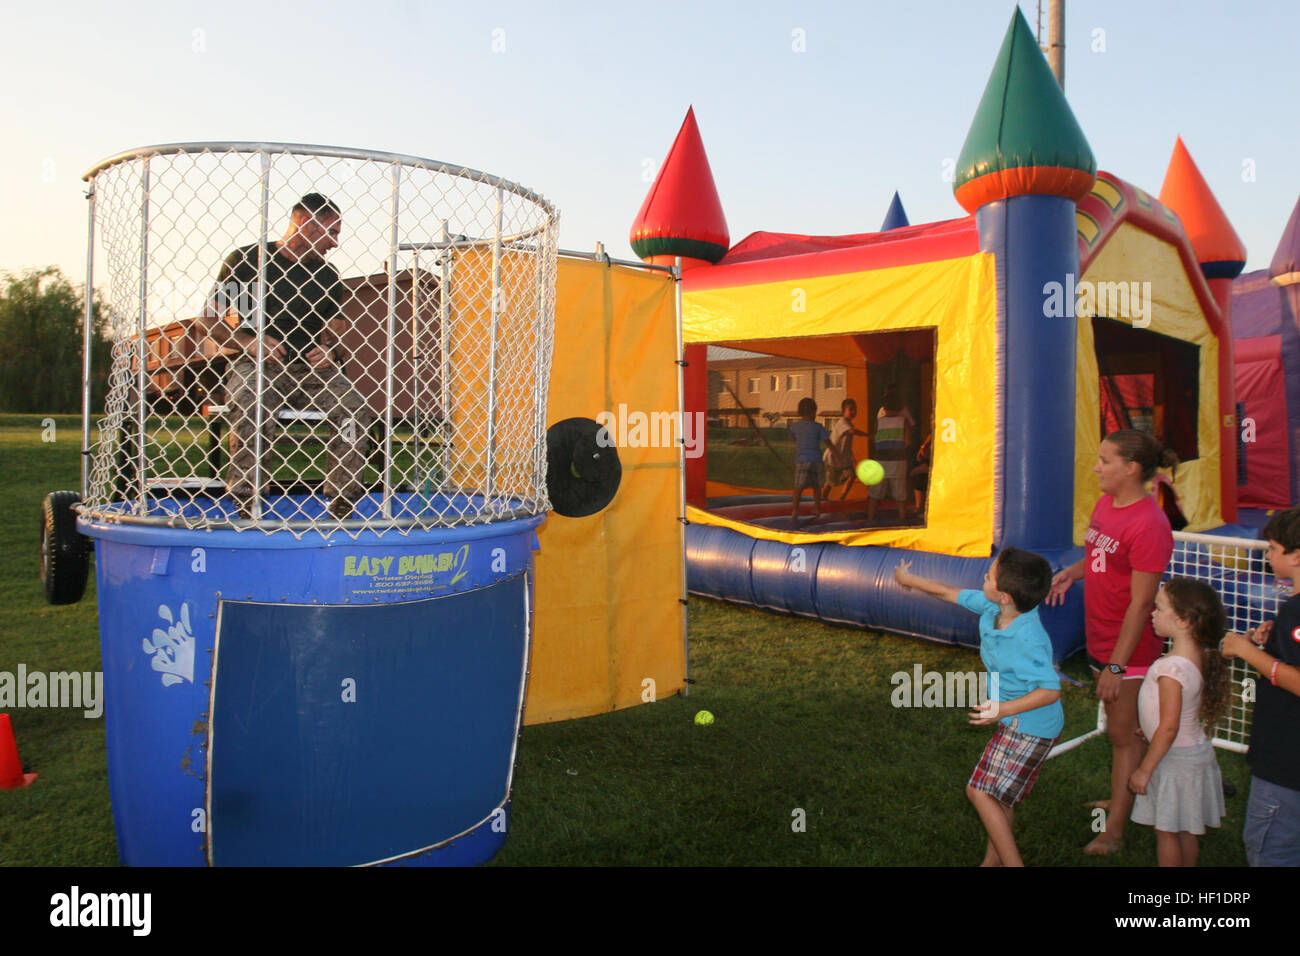 Sgt. Michael Stanley, an ammunitions technician specialist with Special-Purpose Marine-Air Ground Task Force Africa 13, awaits being dunked as children throw softballs attempting to hit the target at the National Night Out event aboard Naval Air Station Sigonella, Italy, Aug. 6, 2013. Marines and sailors with Special-Purpose MAGTF Africa participated in the event with a static display of weapons, both lethal and non-lethal. The task force continues to build relations with the community while simultaneously strengthening U.S. Marine Corps Forces Africa and U.S. Africa Command's ability to assis Stock Photo